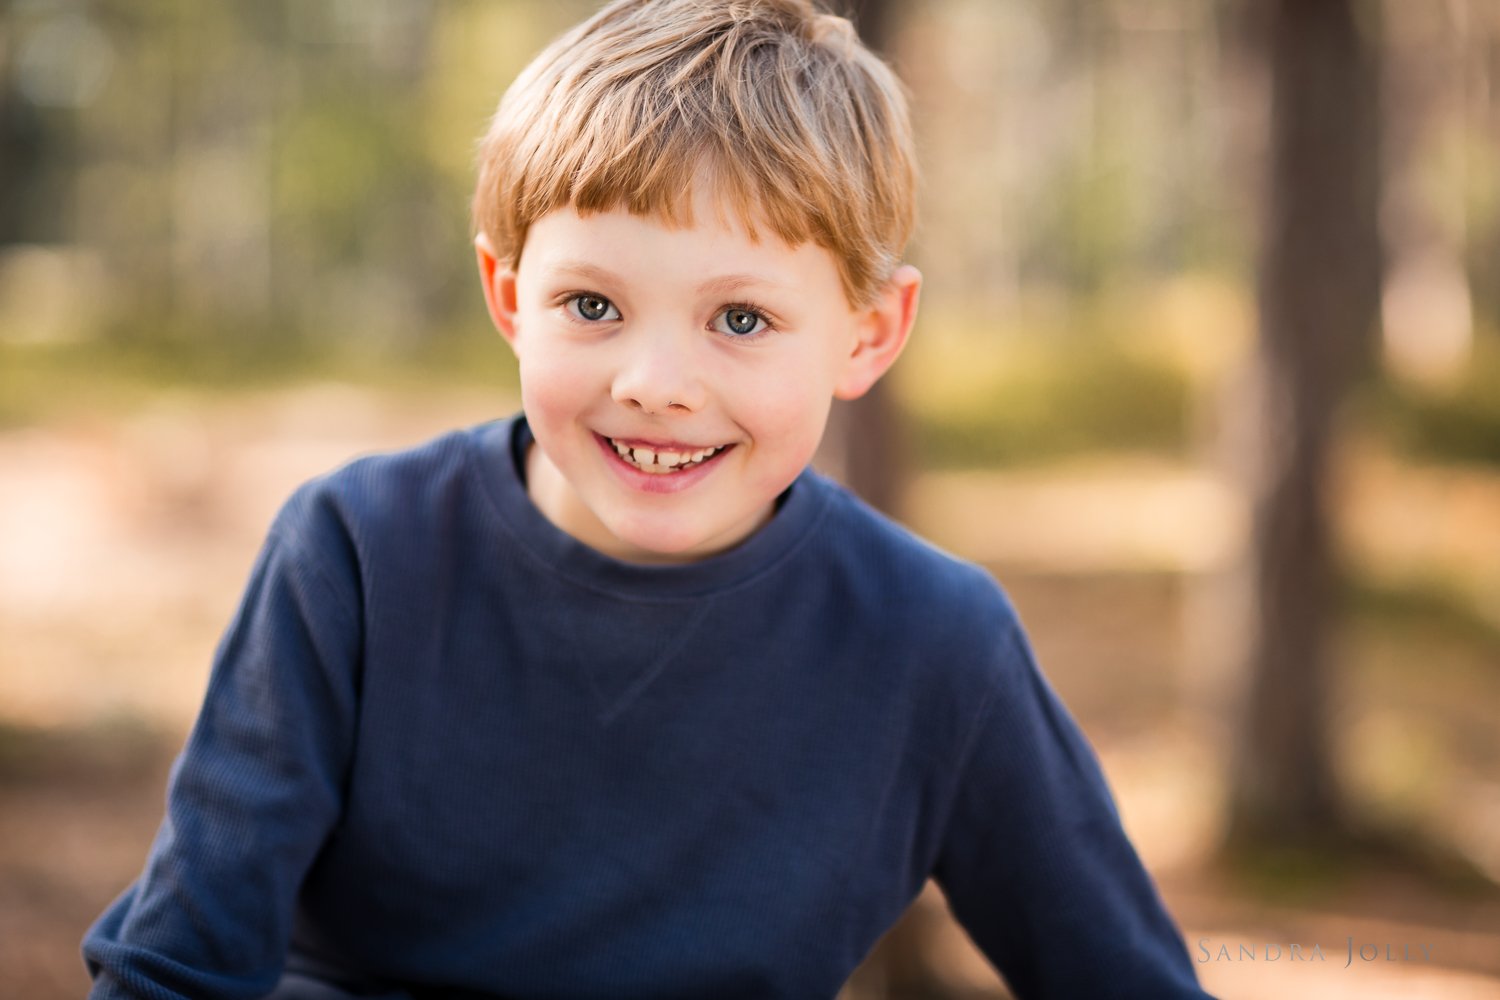 portrait-of-young-blonde-boy-by-sandra-jolly-photography.jpg